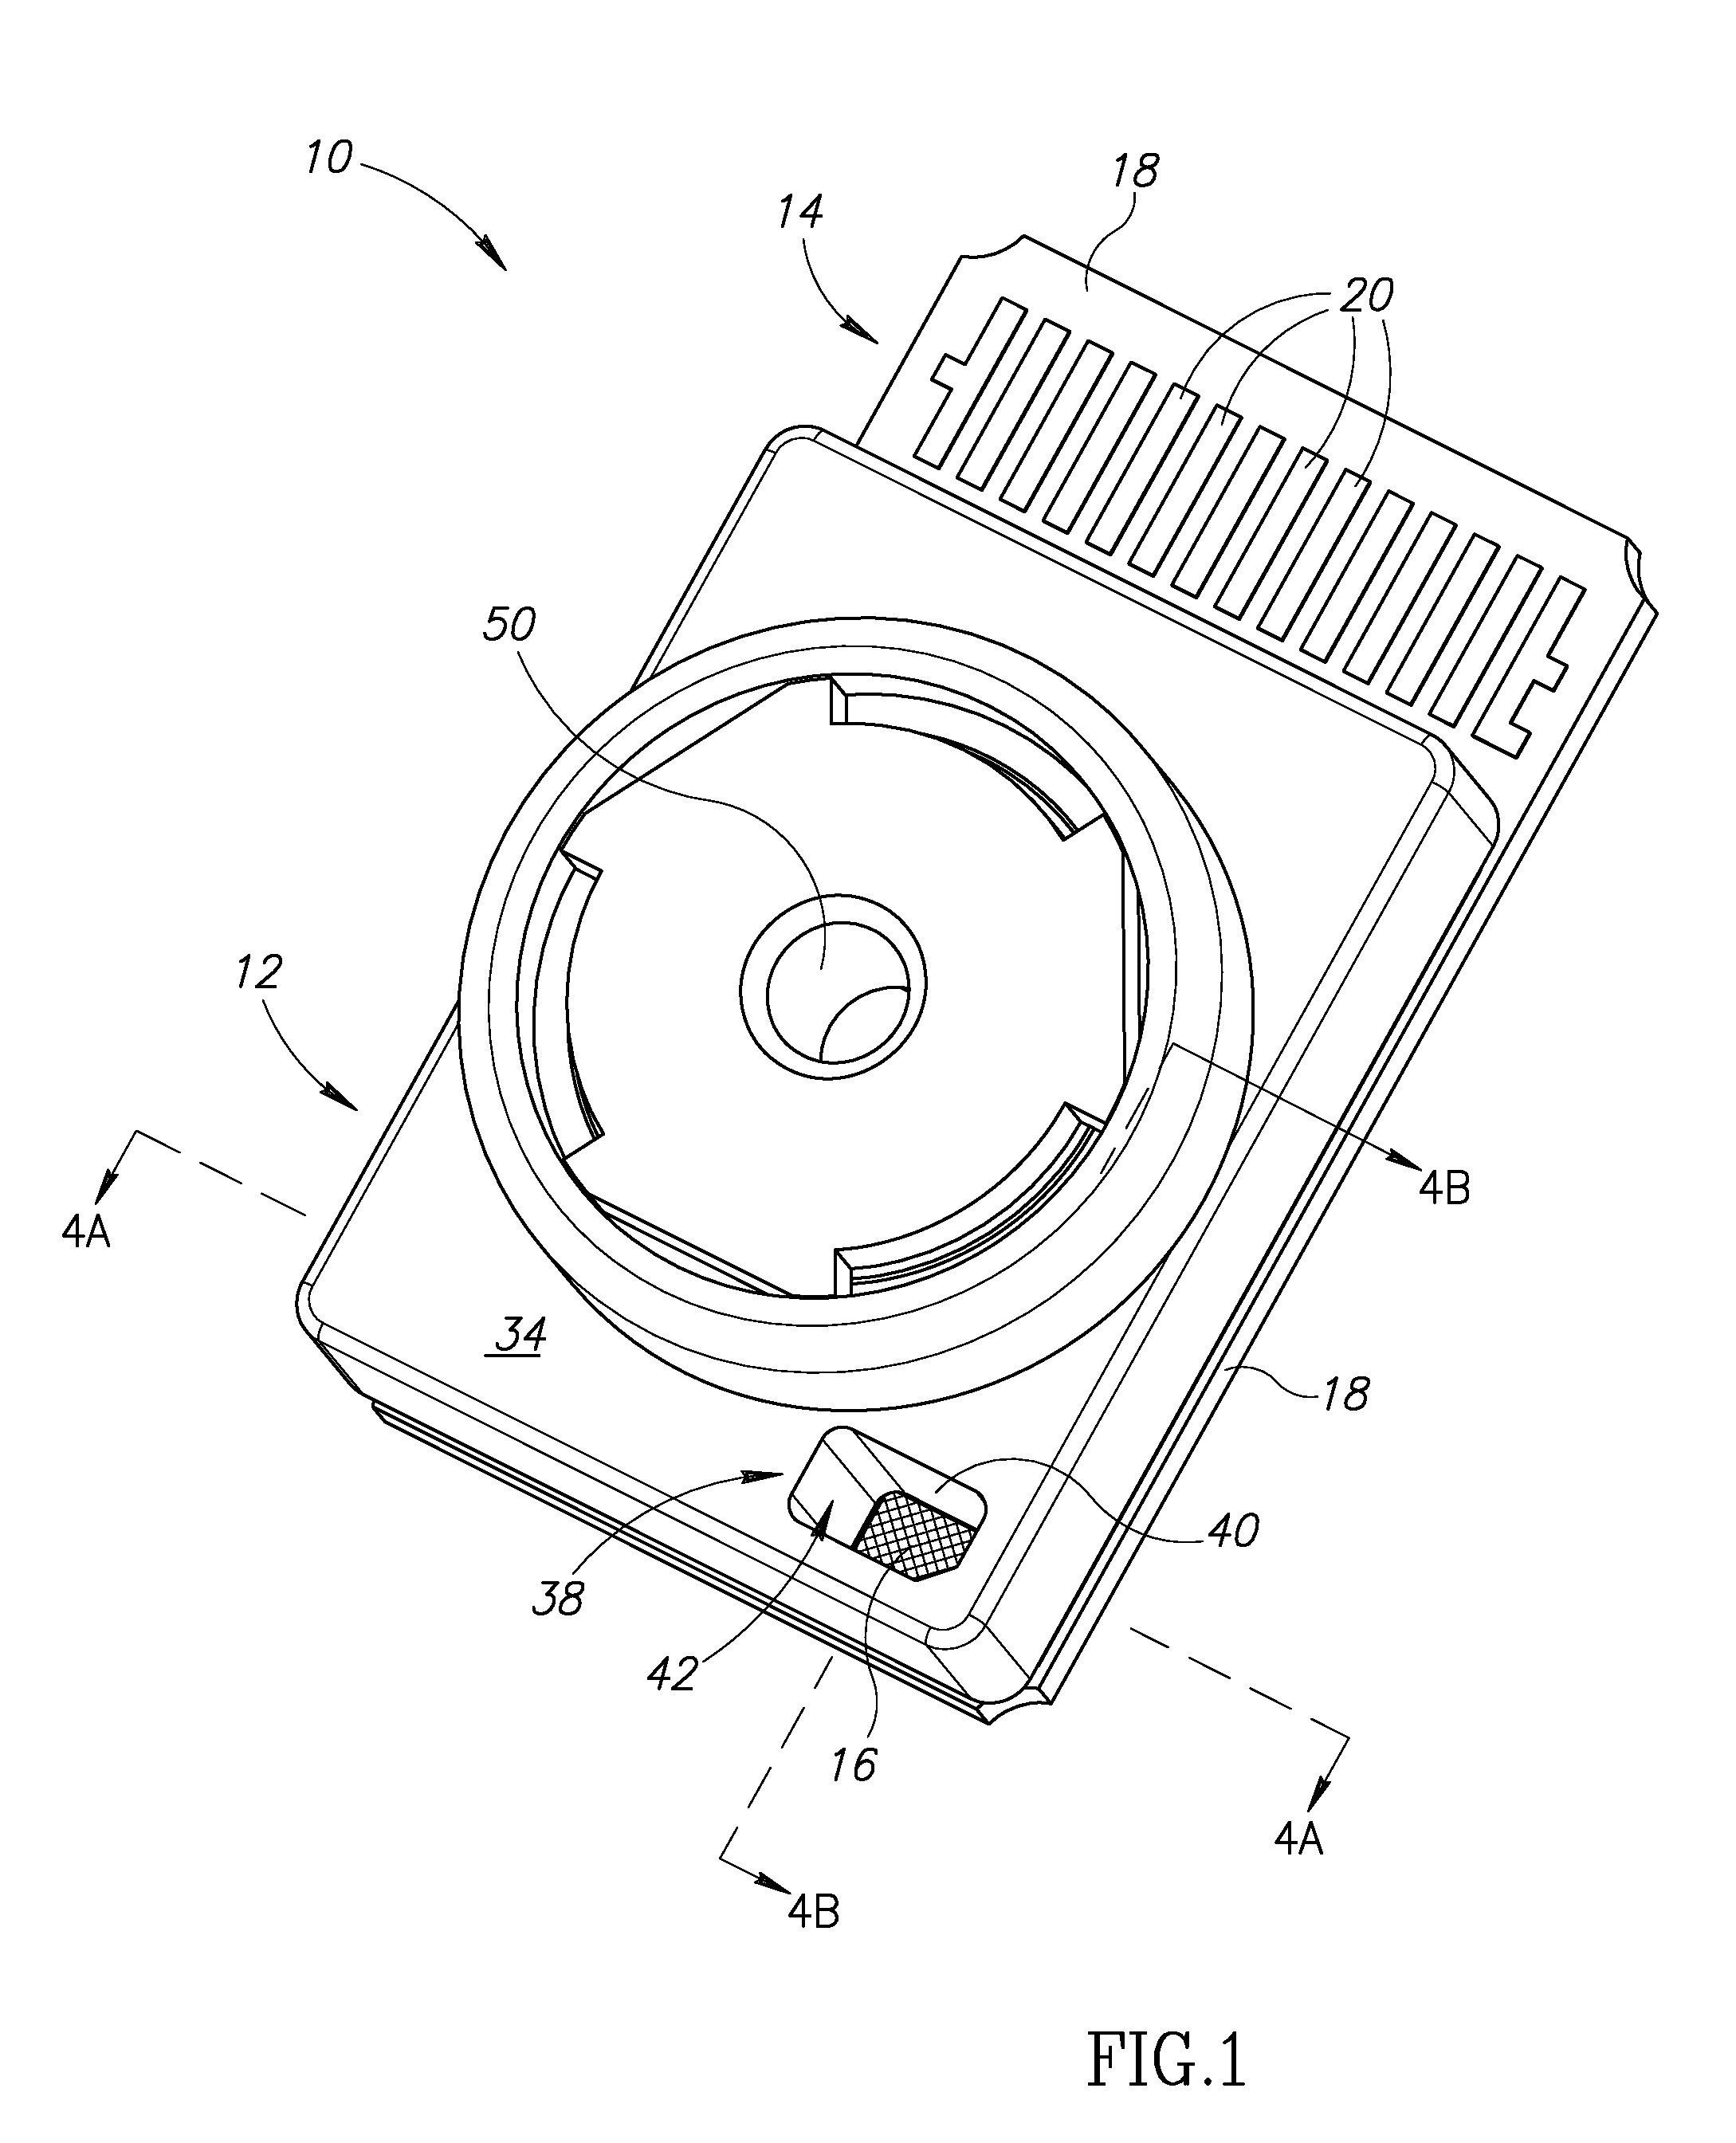 Lens mount with conductive glue pocket for grounding to a circuit board